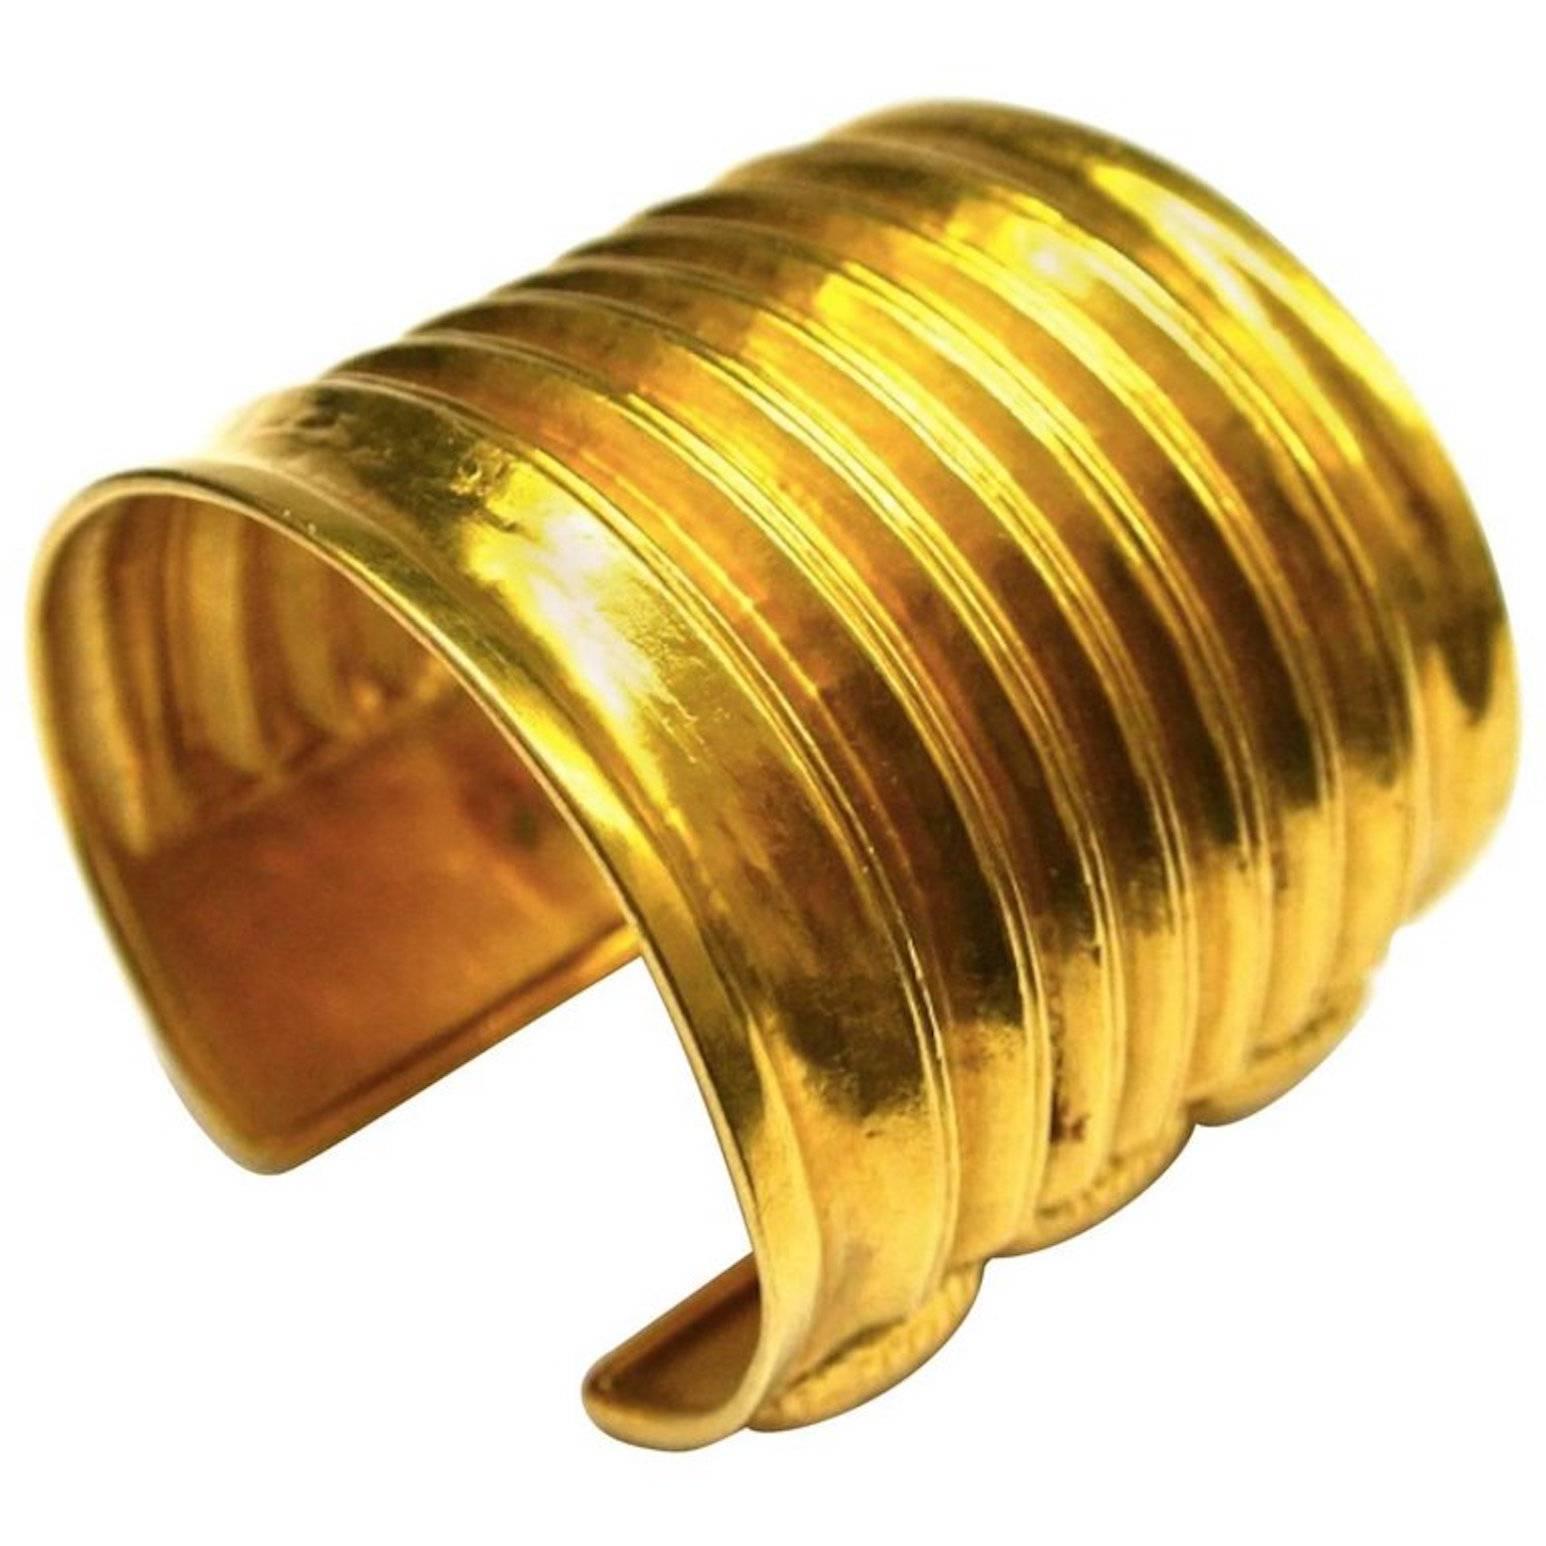 18k Yellow Gold Significant Cuff by Ilias Lalaounis.
Circa 1980.
Made in GREECE.